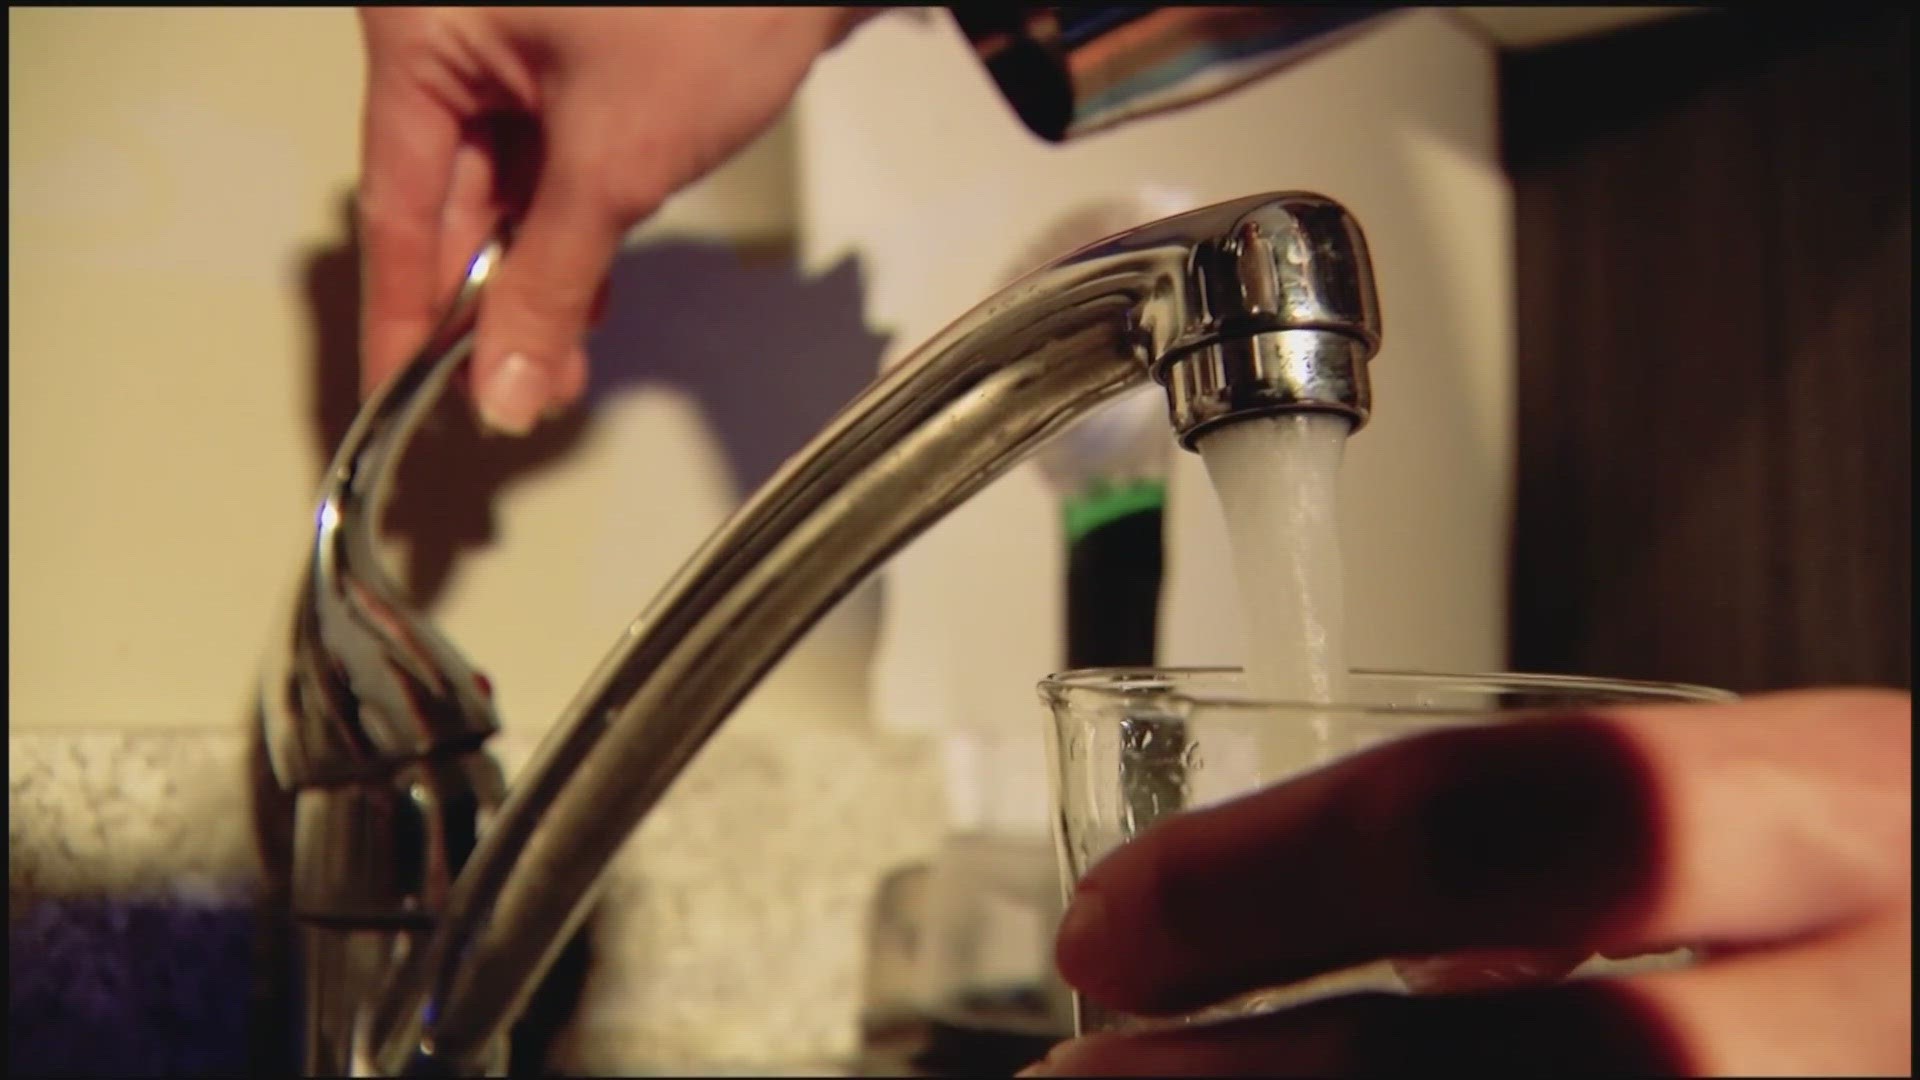 A U.S. Geologic Survey study shows 45% of the country's tap water has potentially dangerous chemicals in it.